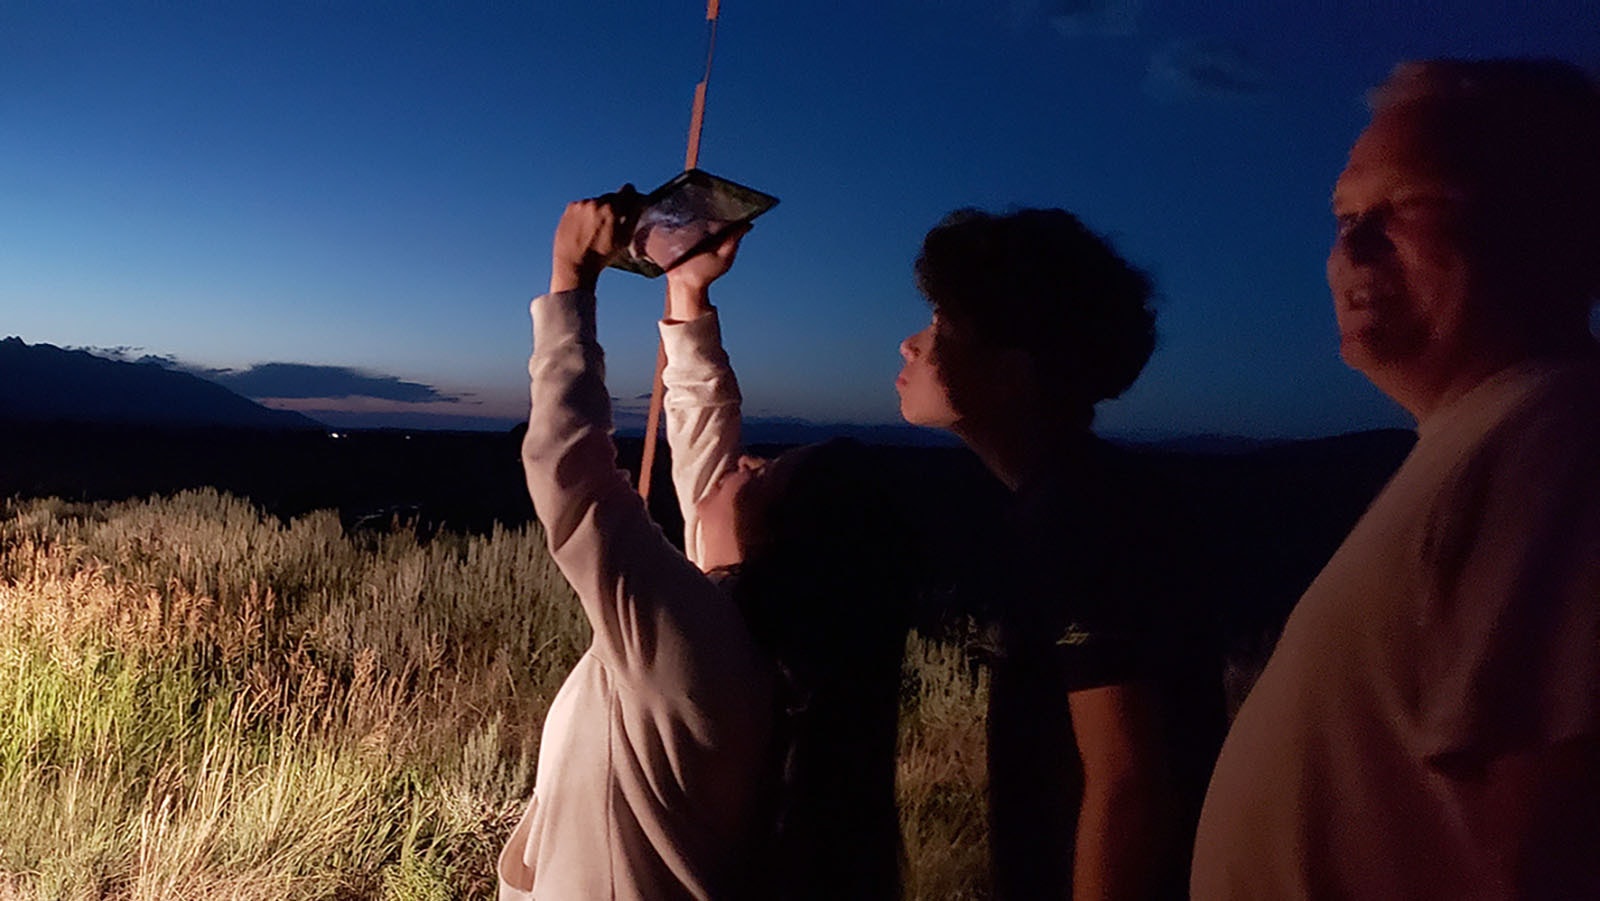 A tour group from Texas tries out an iPad equipped with an app that will highlight anything interesting in the piece of sky its being pointed at.